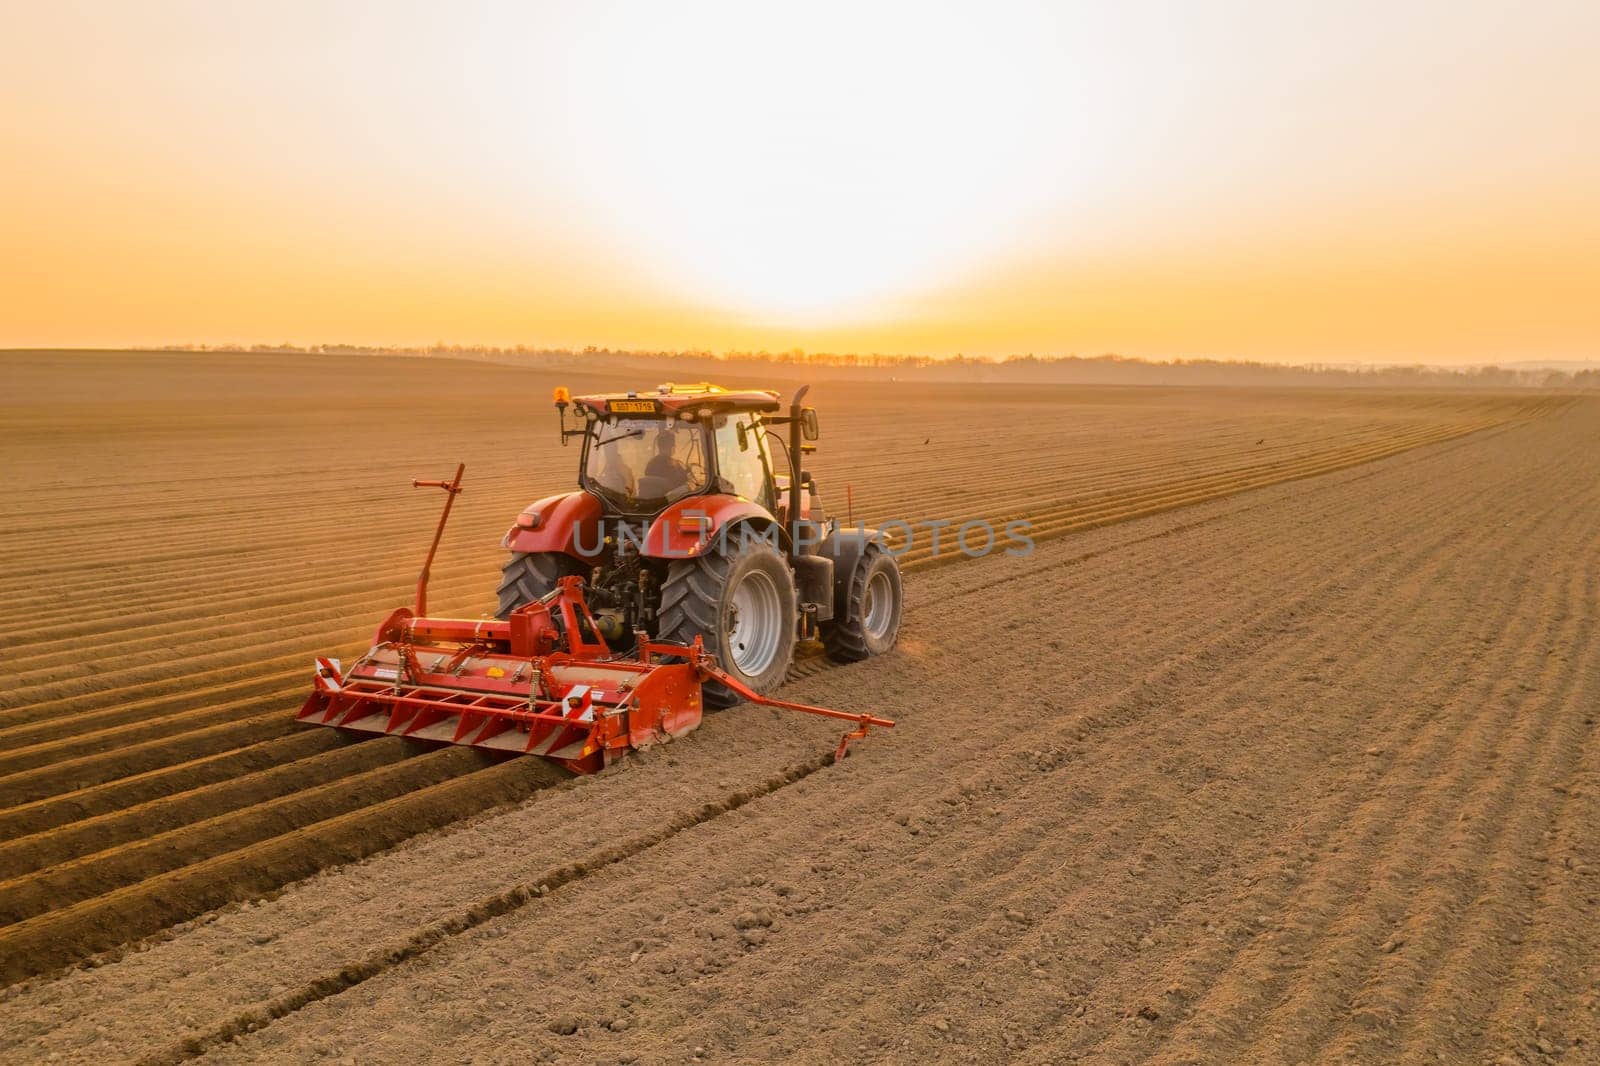 PRAGUE , CZECH REPUBLIC - MARCH 18 2022: Modern tractor cultivates soil in field on agricultural farm at bright sunset. Powerful machine works dragging plow behind at rural site in evening